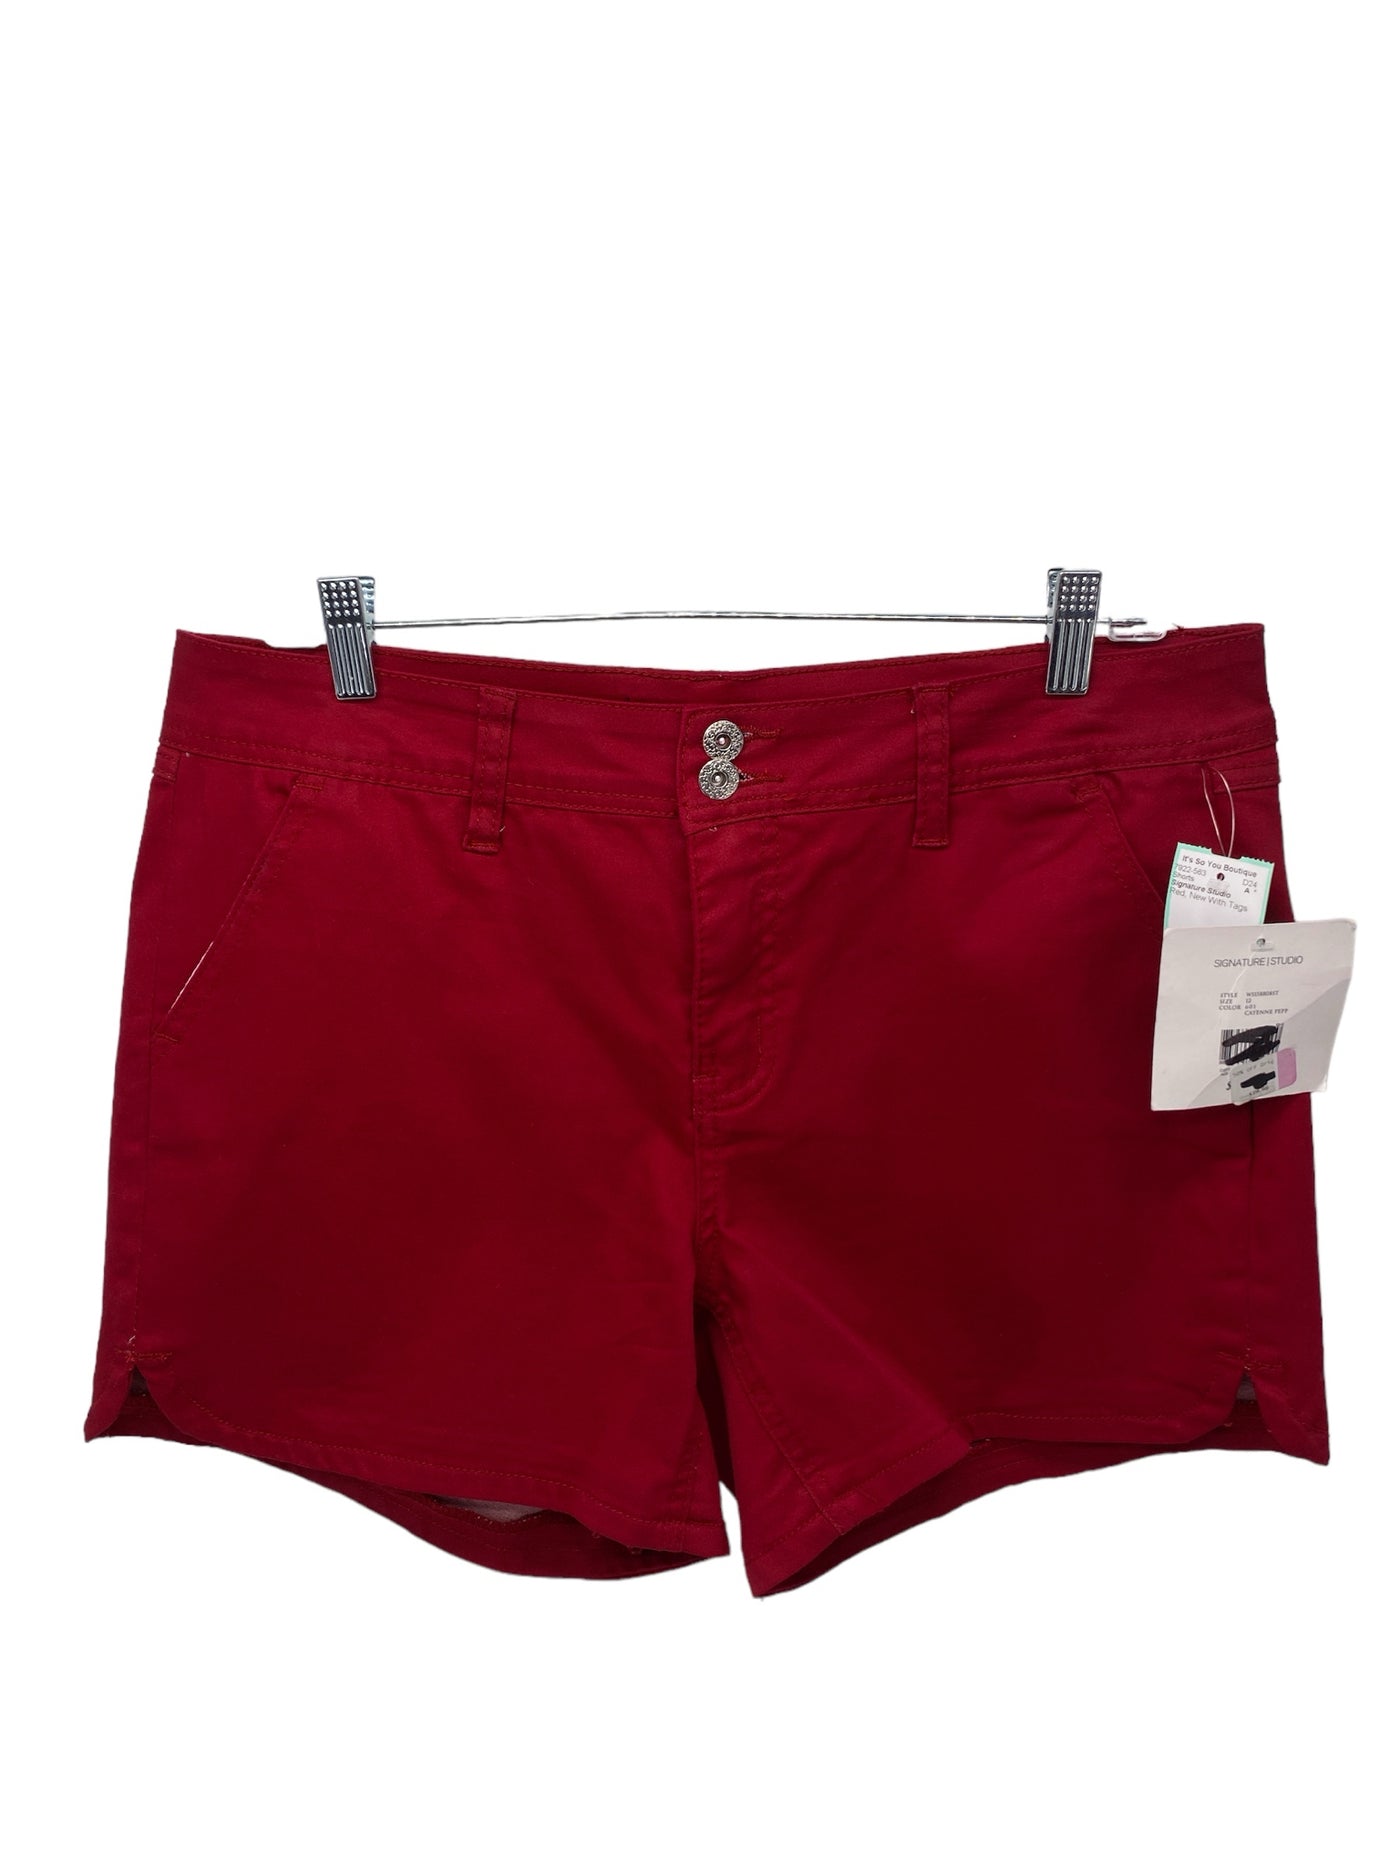 Signature Studio Misses Size 12 Red New With Tags Shorts